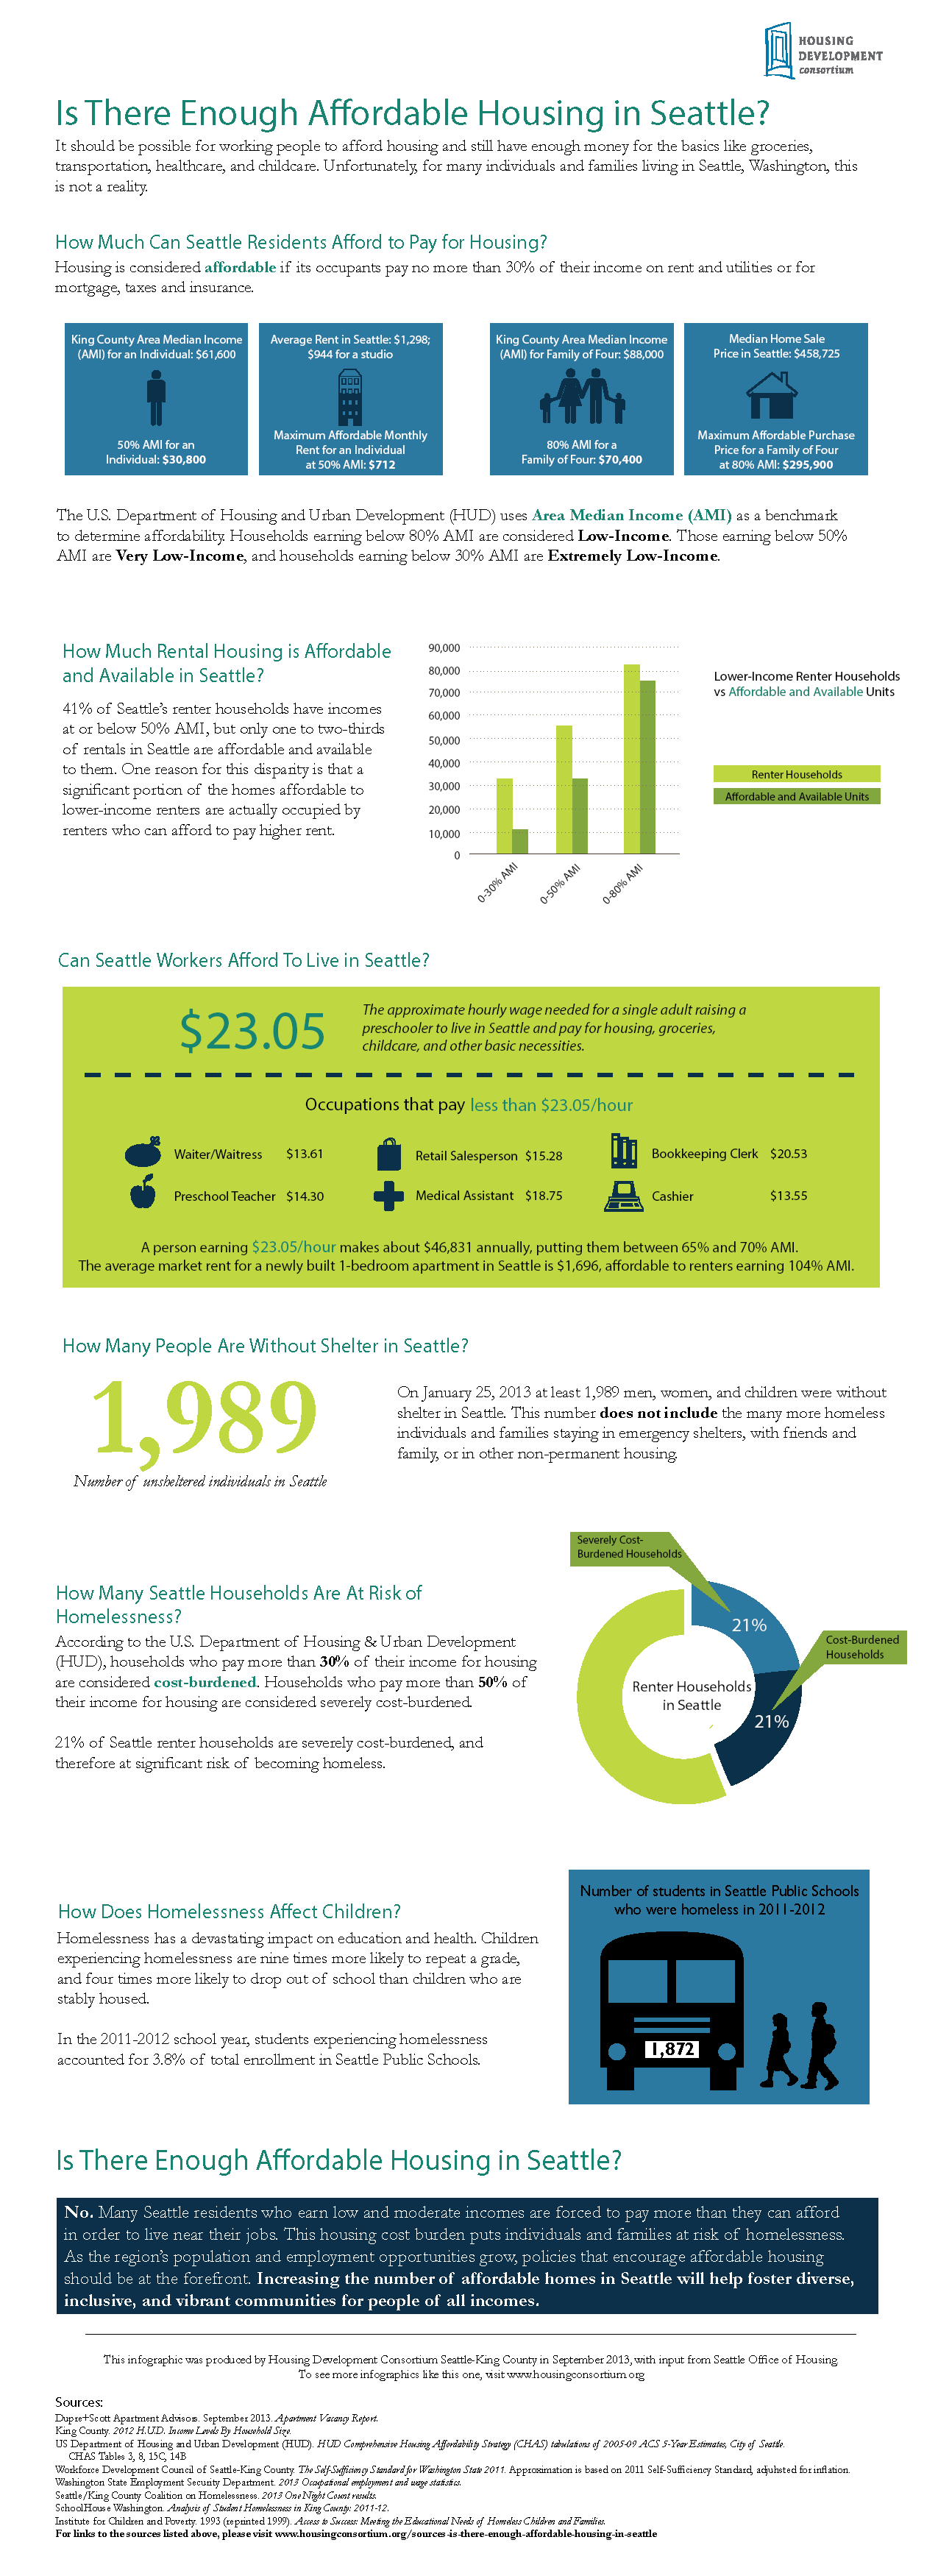 HDC Seattle Affordable Housing Infographic_HighRes